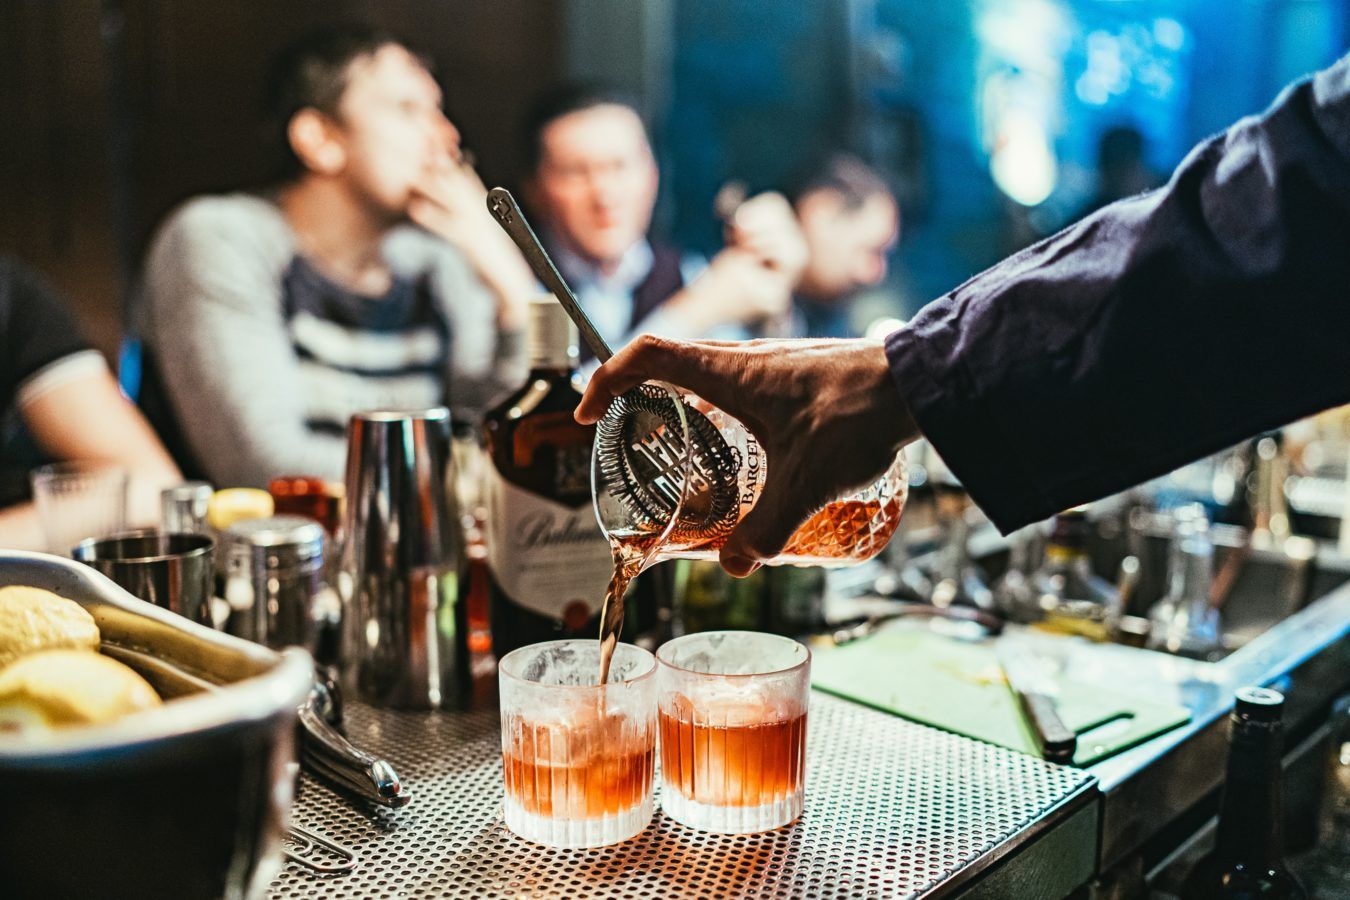 Asia’s 50 Best Bars 2022 will be announced on 28 April in Bangkok